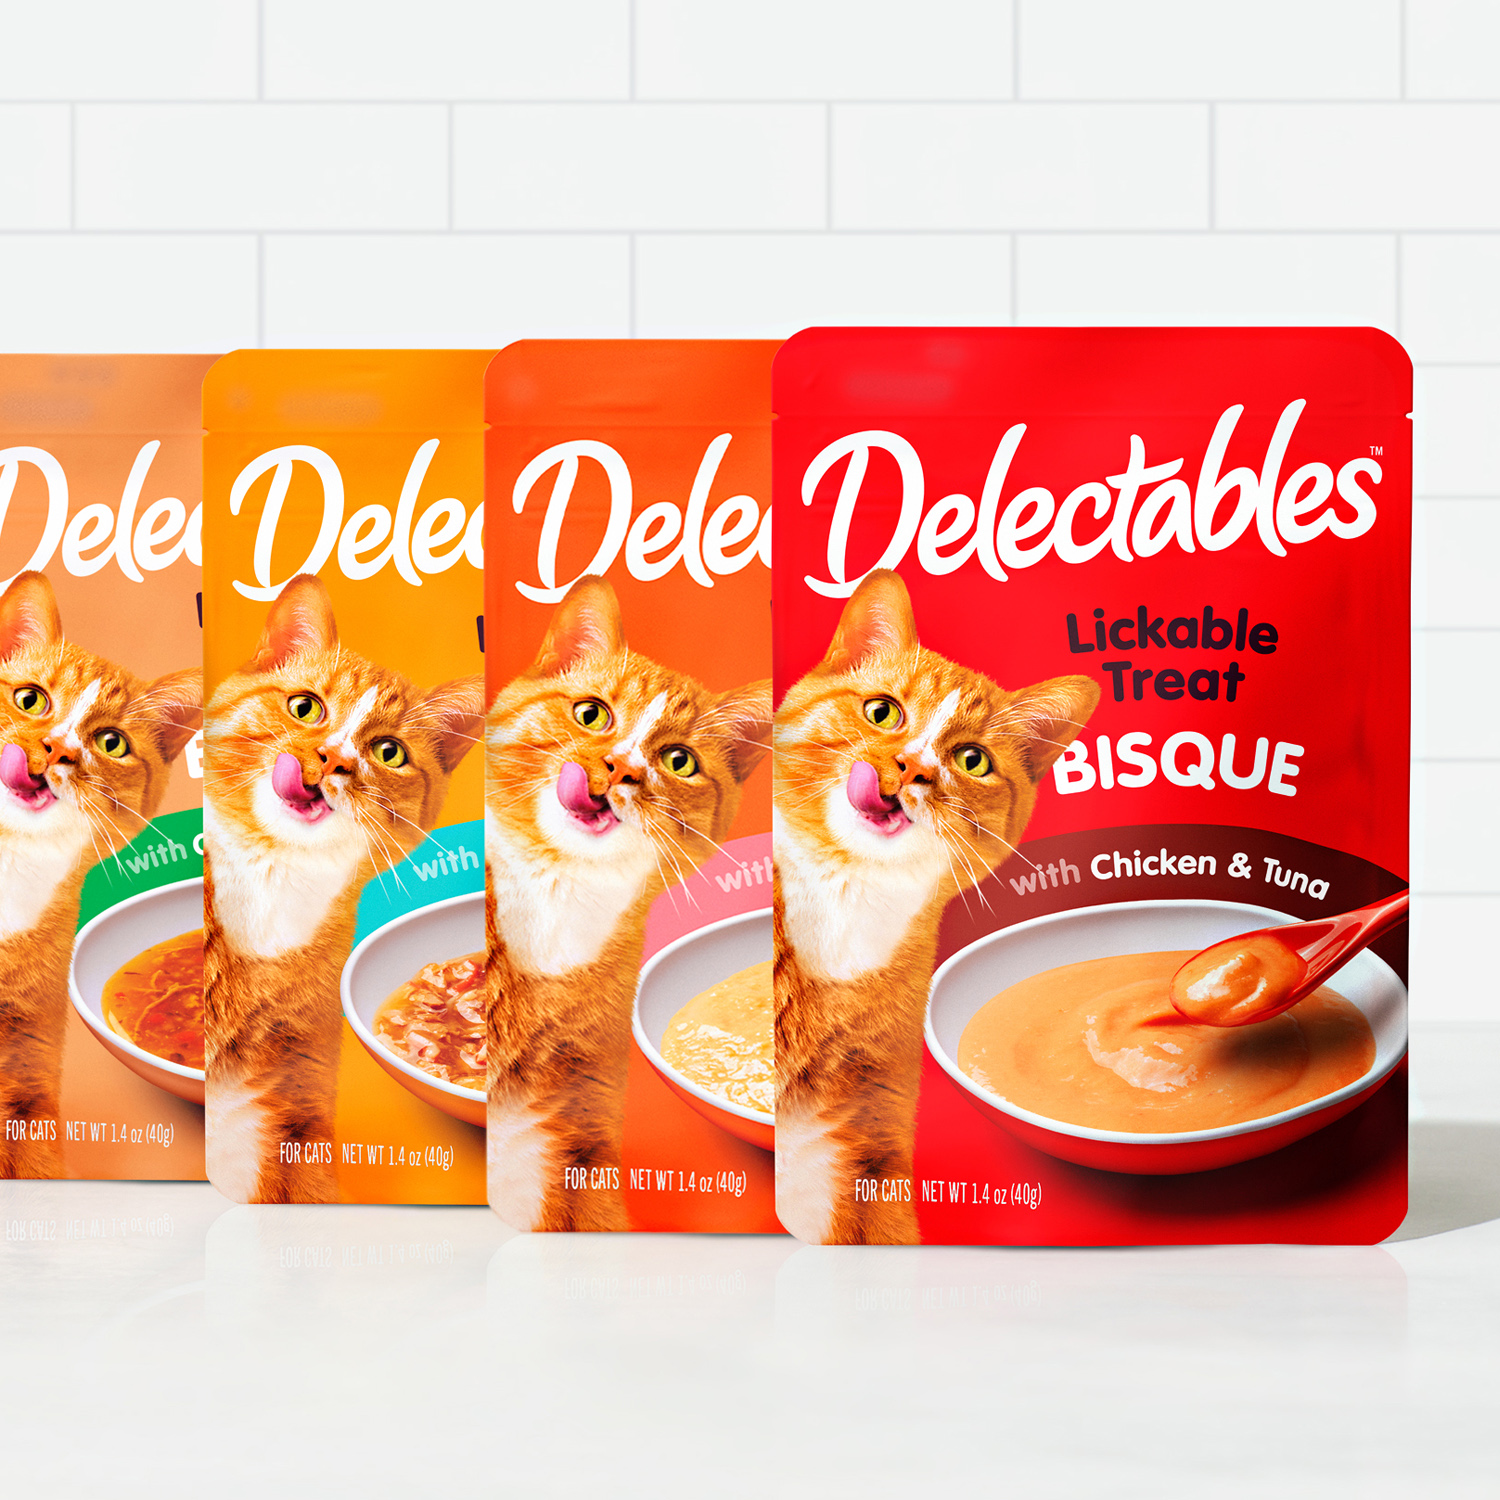 Delelctables brand refresh Lickable Treat packaging lineup.